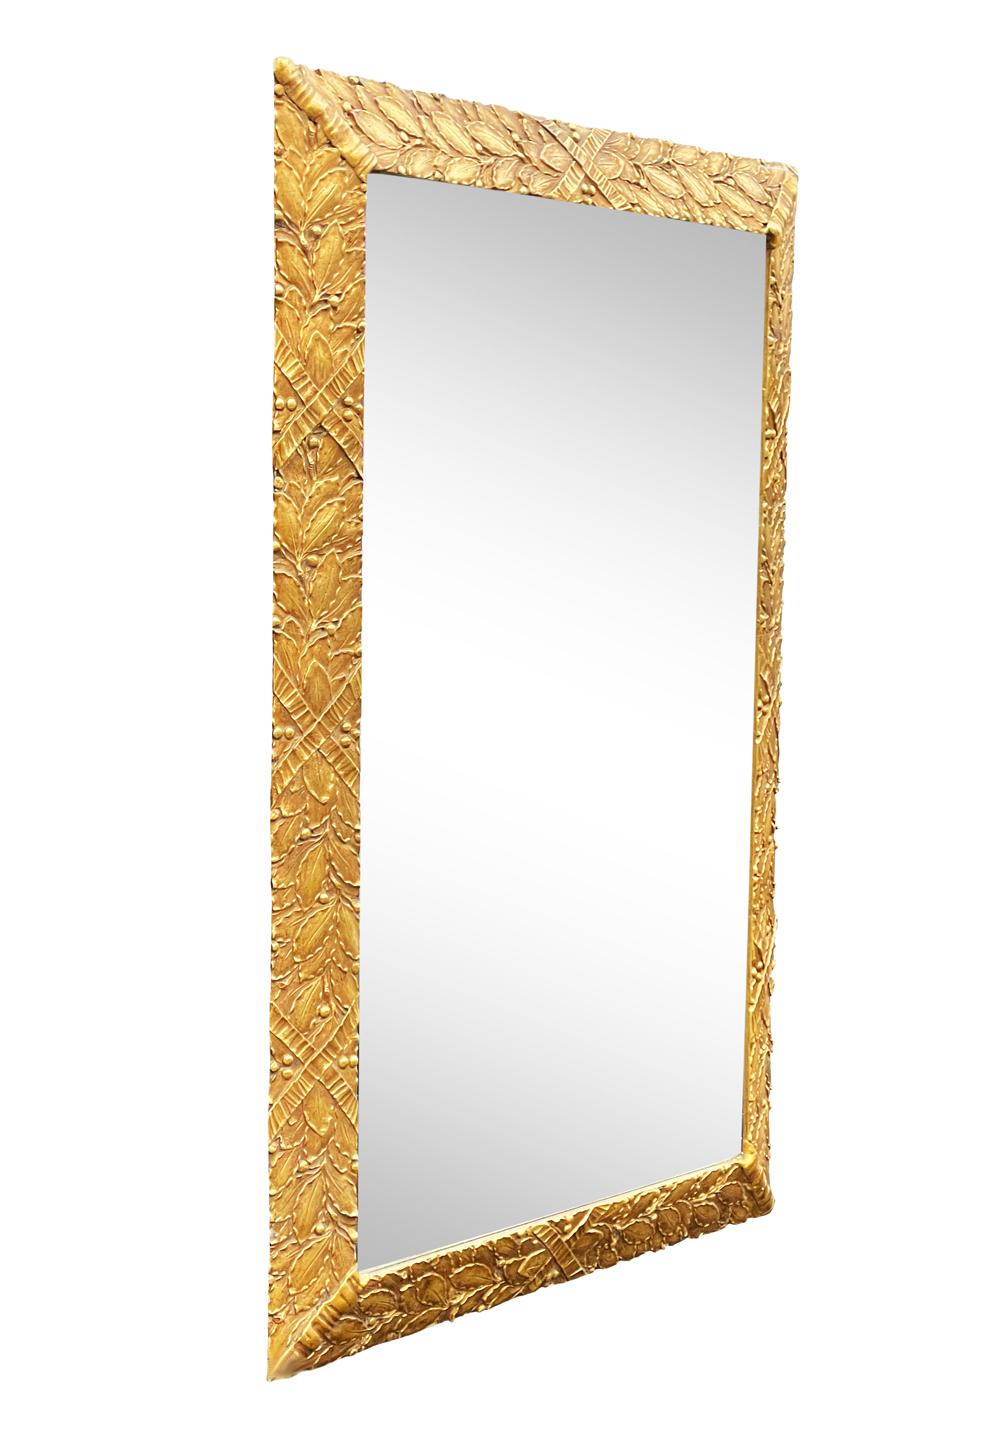 A beautiful large rectangular wall mirror from Italy circa 1960s. It features a carved wood gold gilt frame. In great ready to use condition.